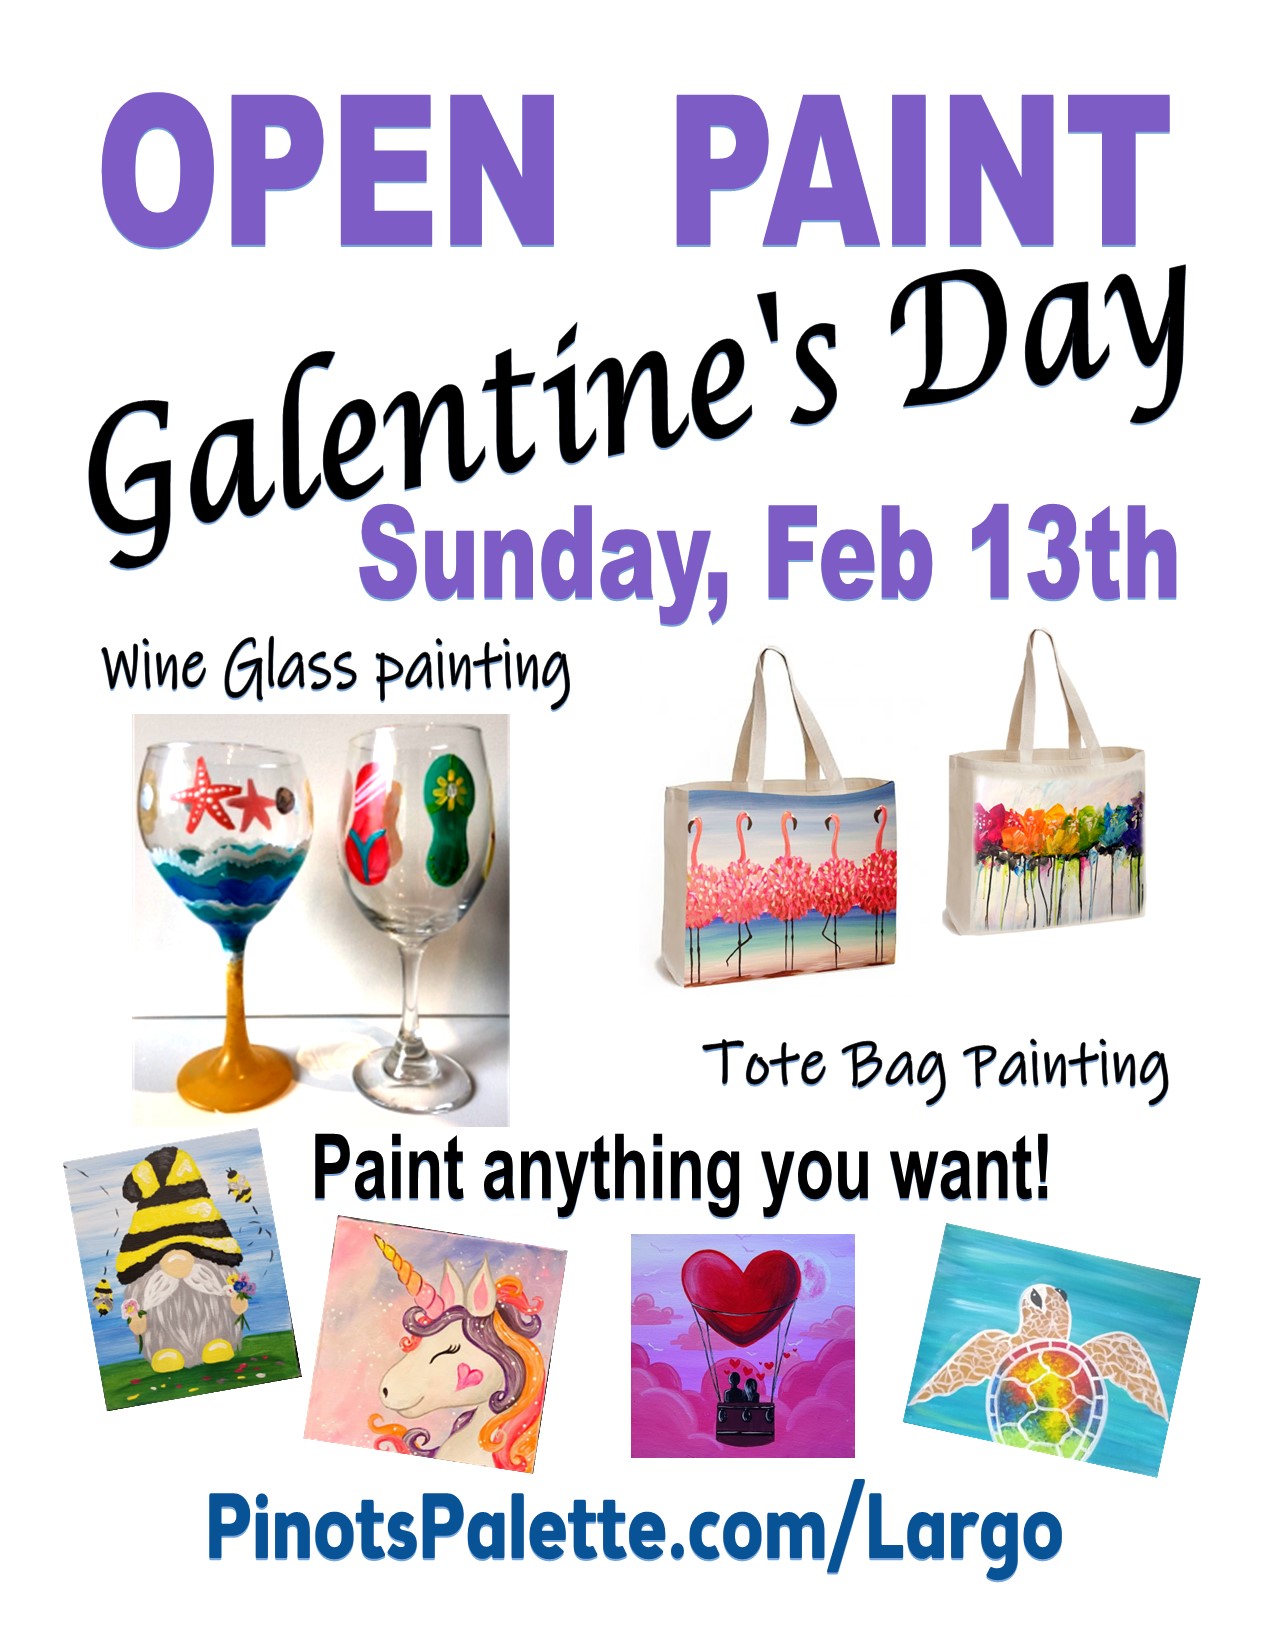 Open Studio at Pinot's Palette